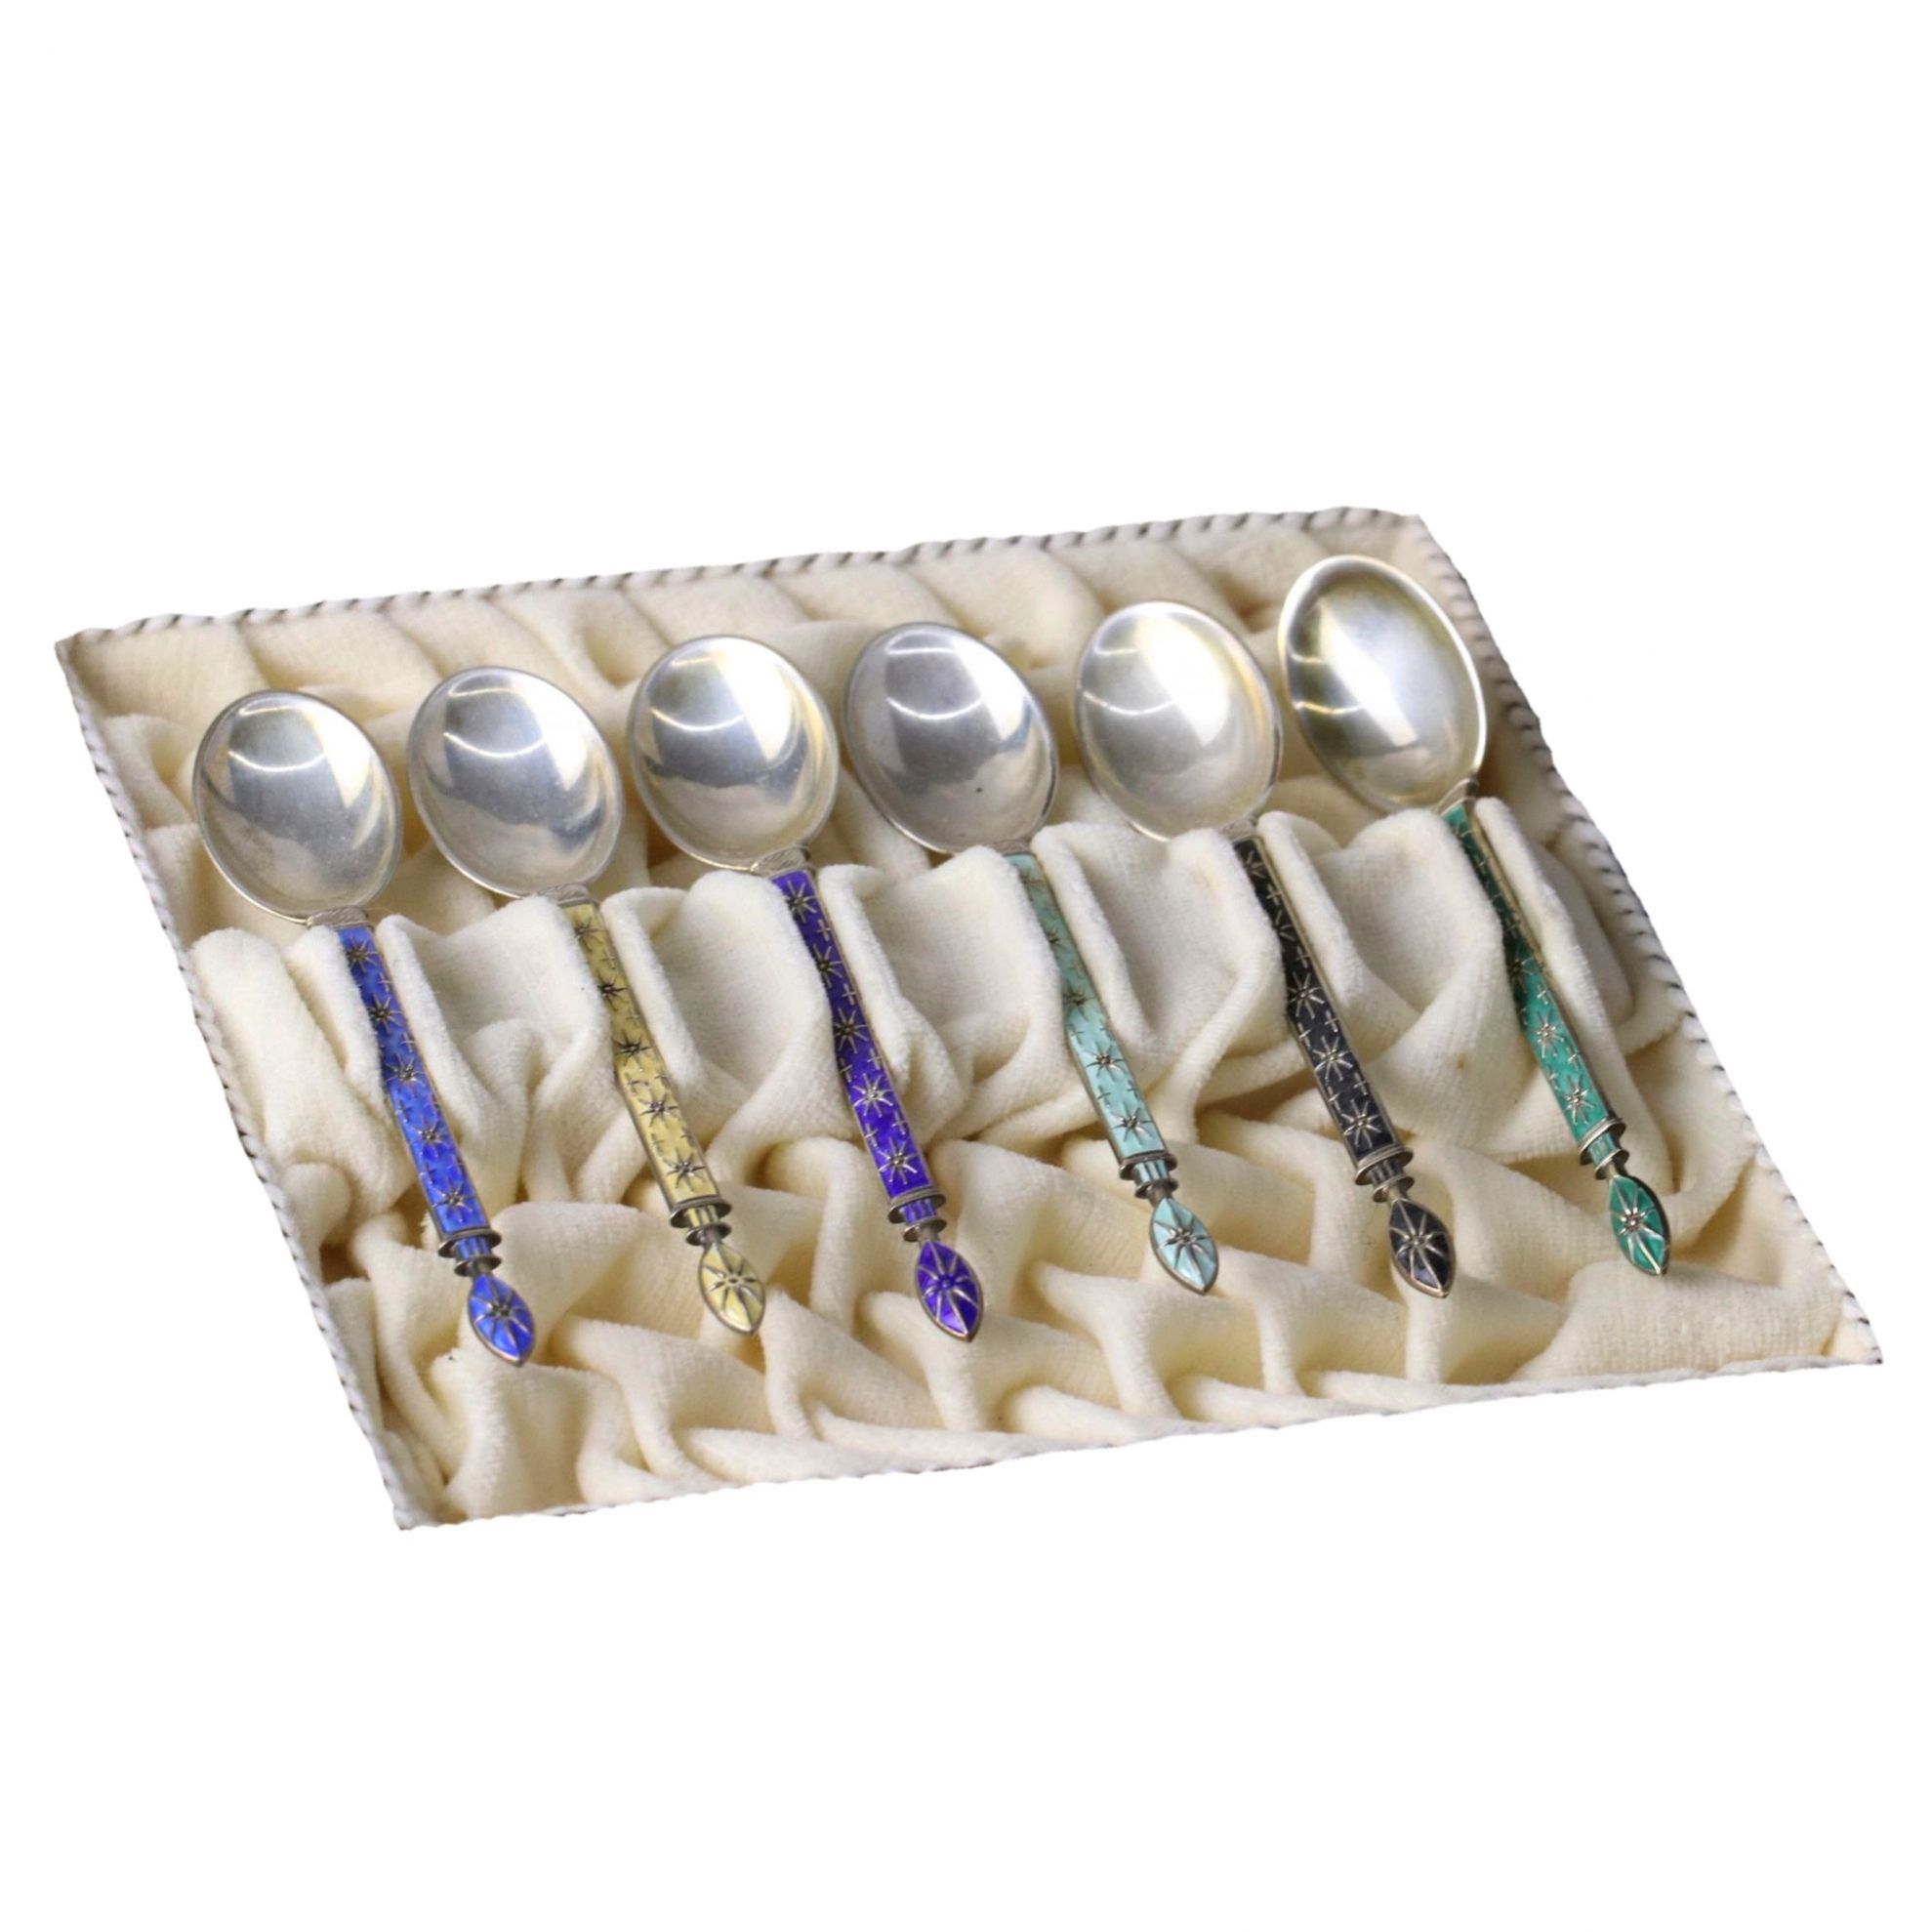 Set-of-6-silver-spoons-with-enamel-in-a-gift-case